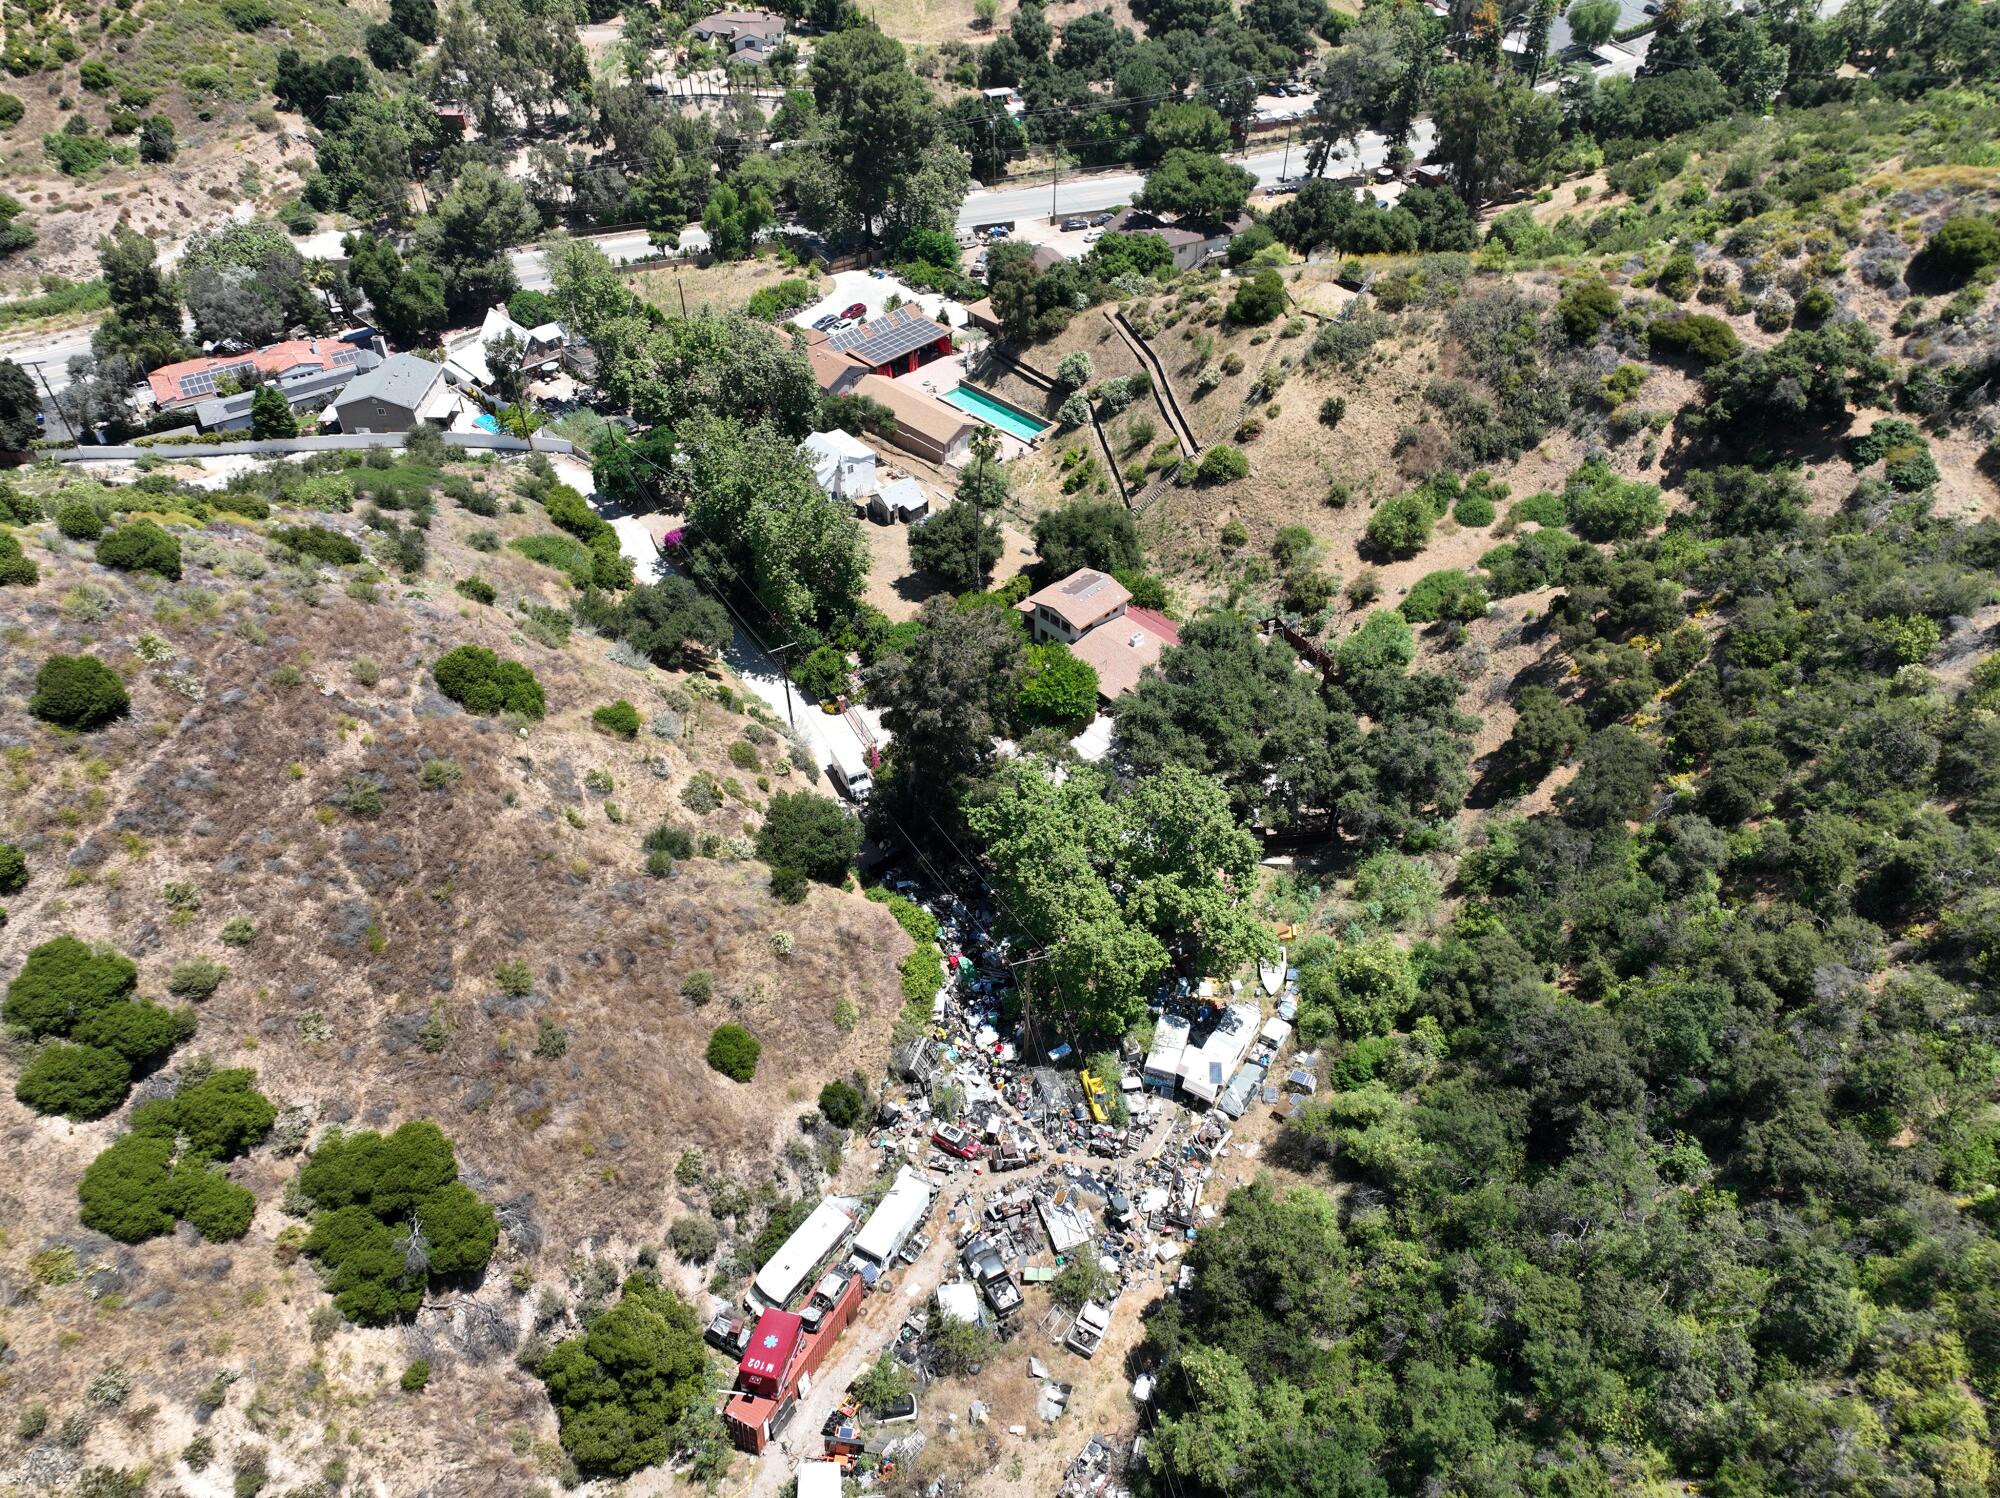 An aerial view of a rural property flanked by trees and grassy hills and crowded with vehicles.